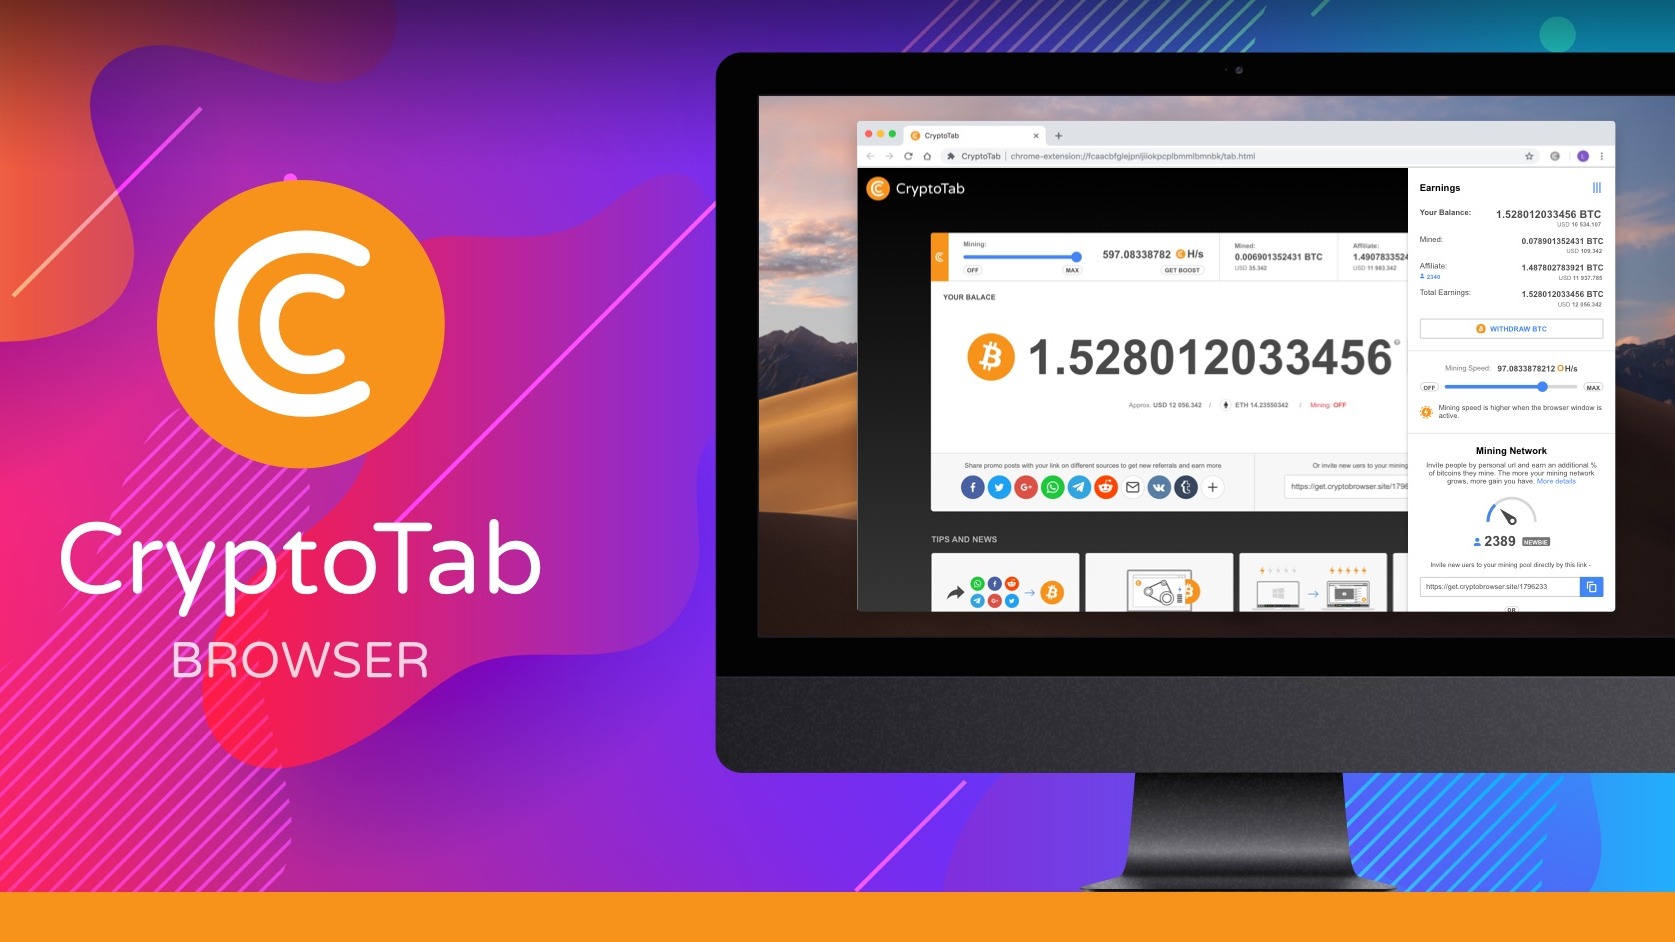 Crypto browser is safe will bitcoin rise again 2018